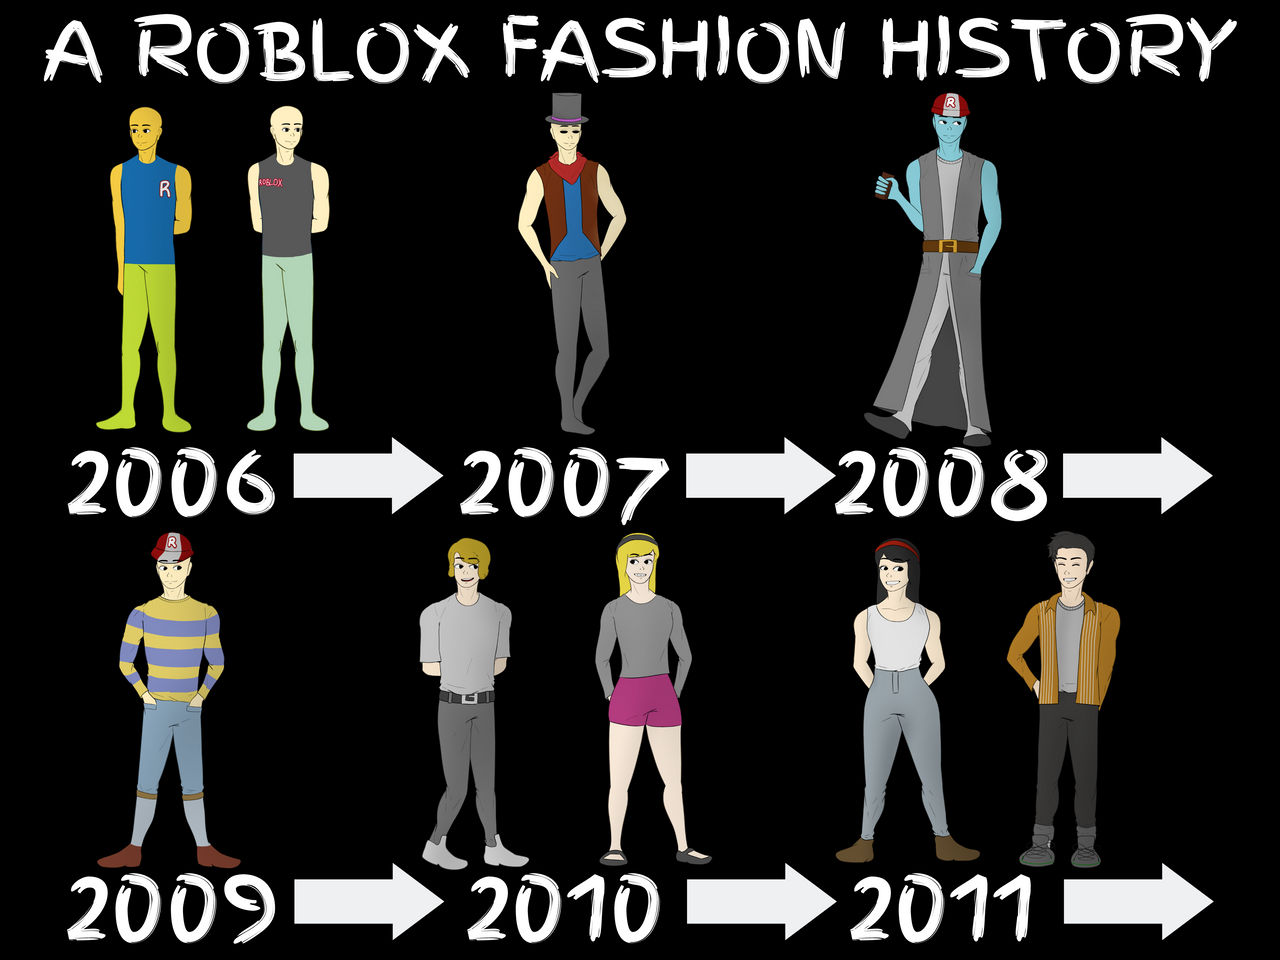 Roblox (Differently), Alternative History